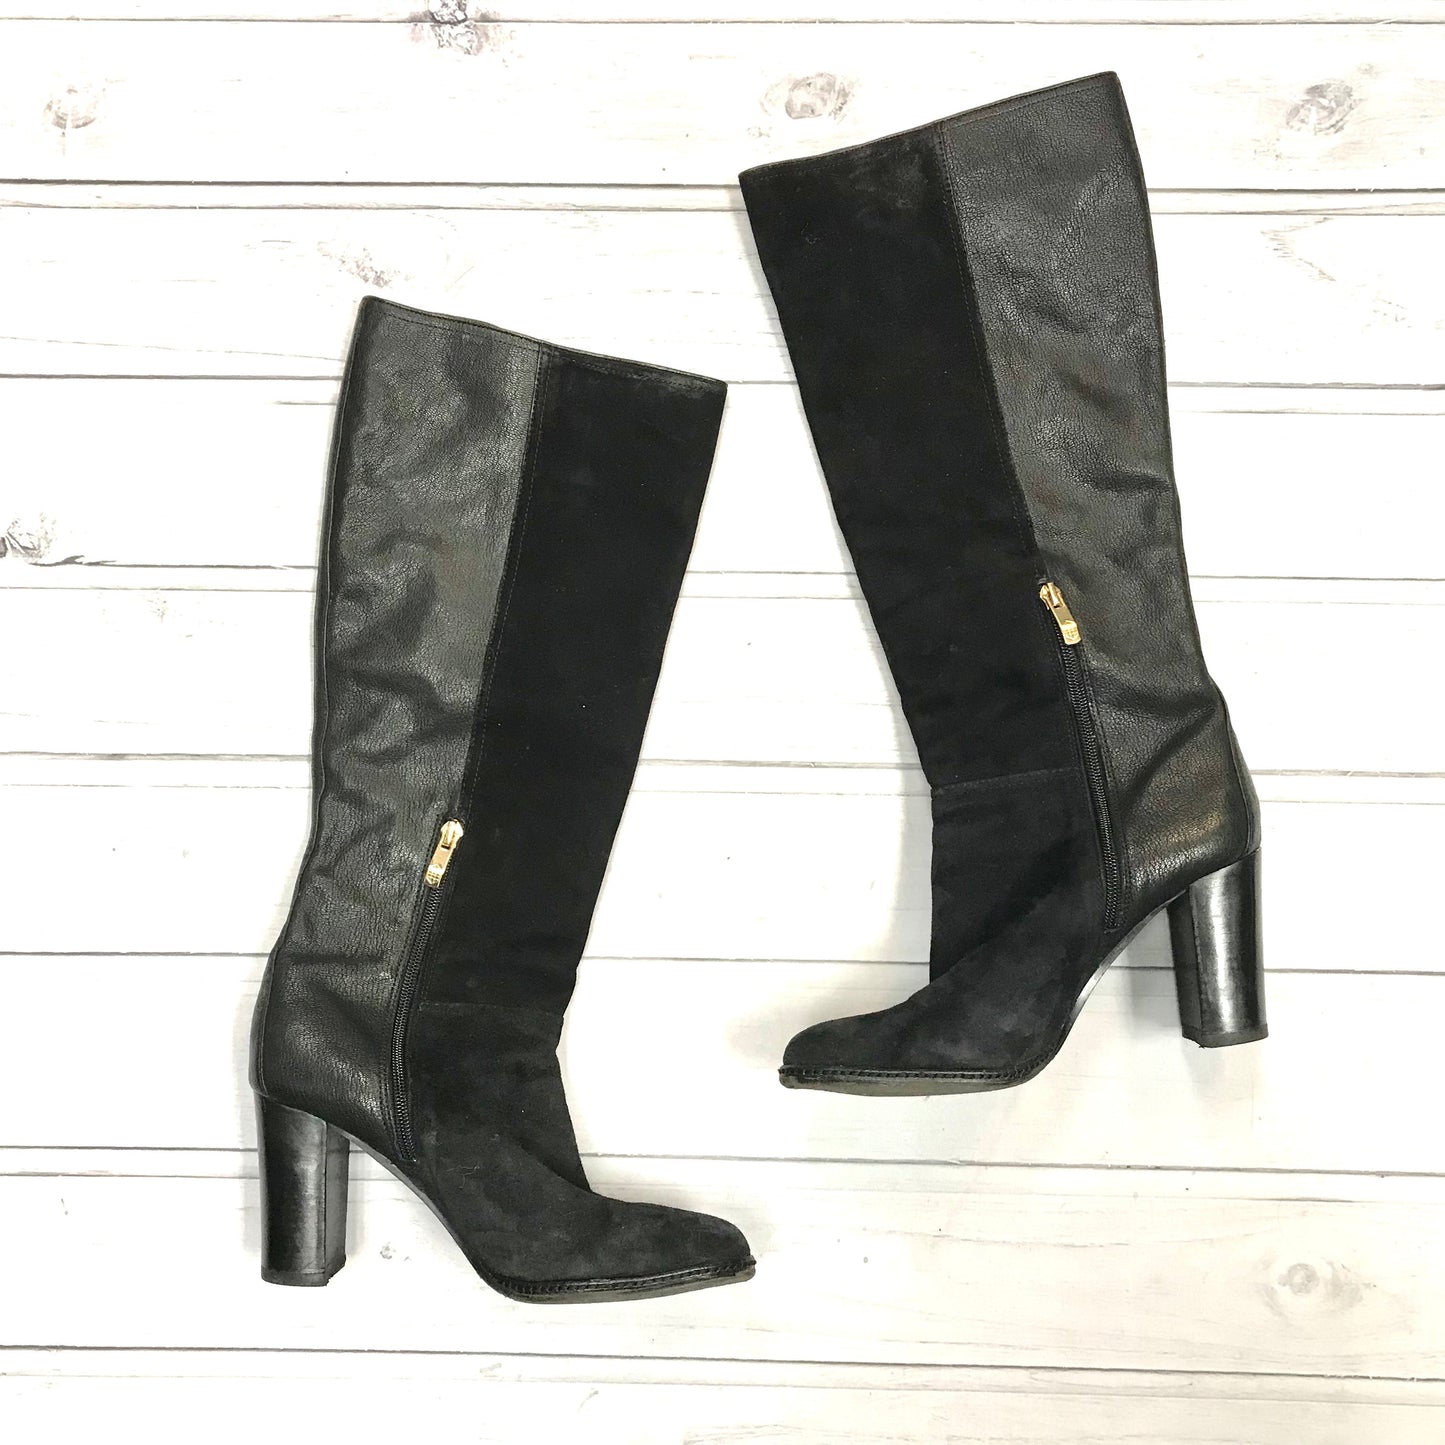 Boots Knee Heels By Vince Camuto  Size: 7.5